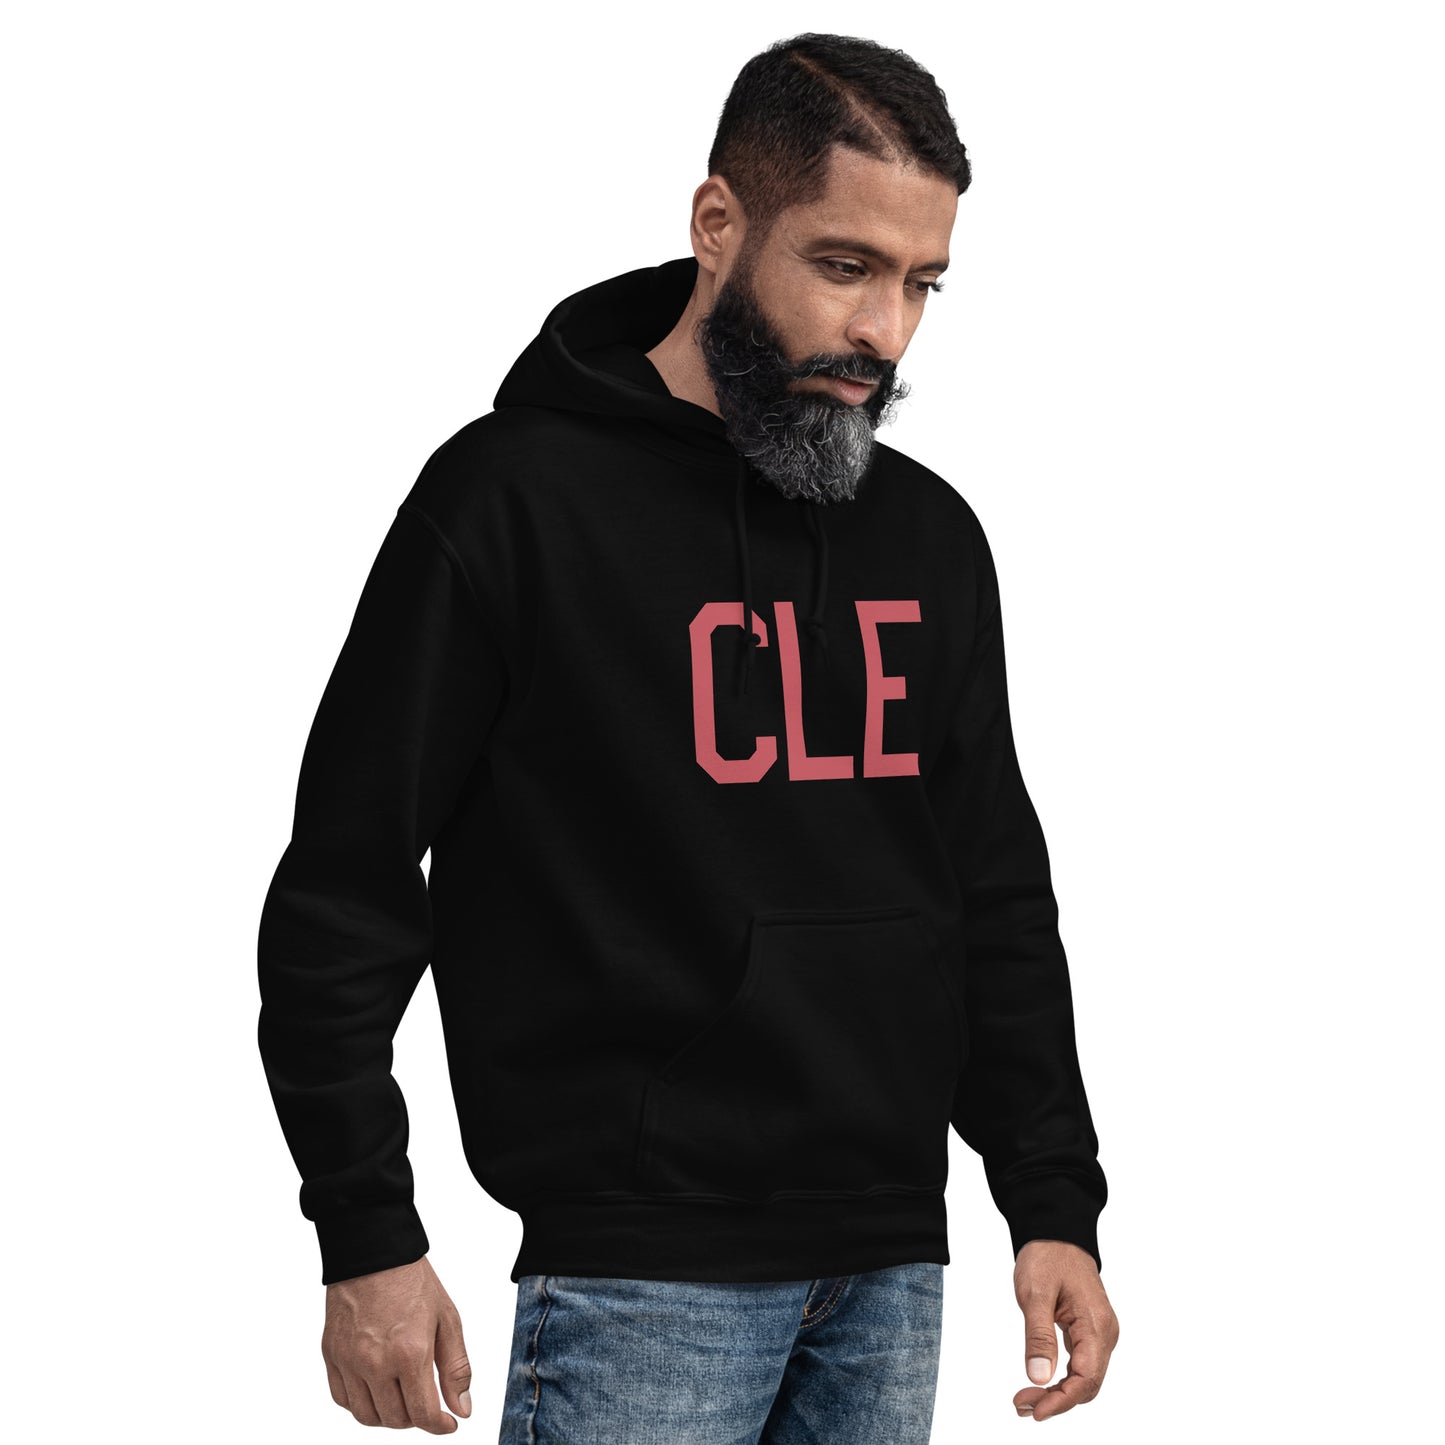 Aviation Enthusiast Hoodie - Deep Pink Graphic • CLE Cleveland • YHM Designs - Image 06